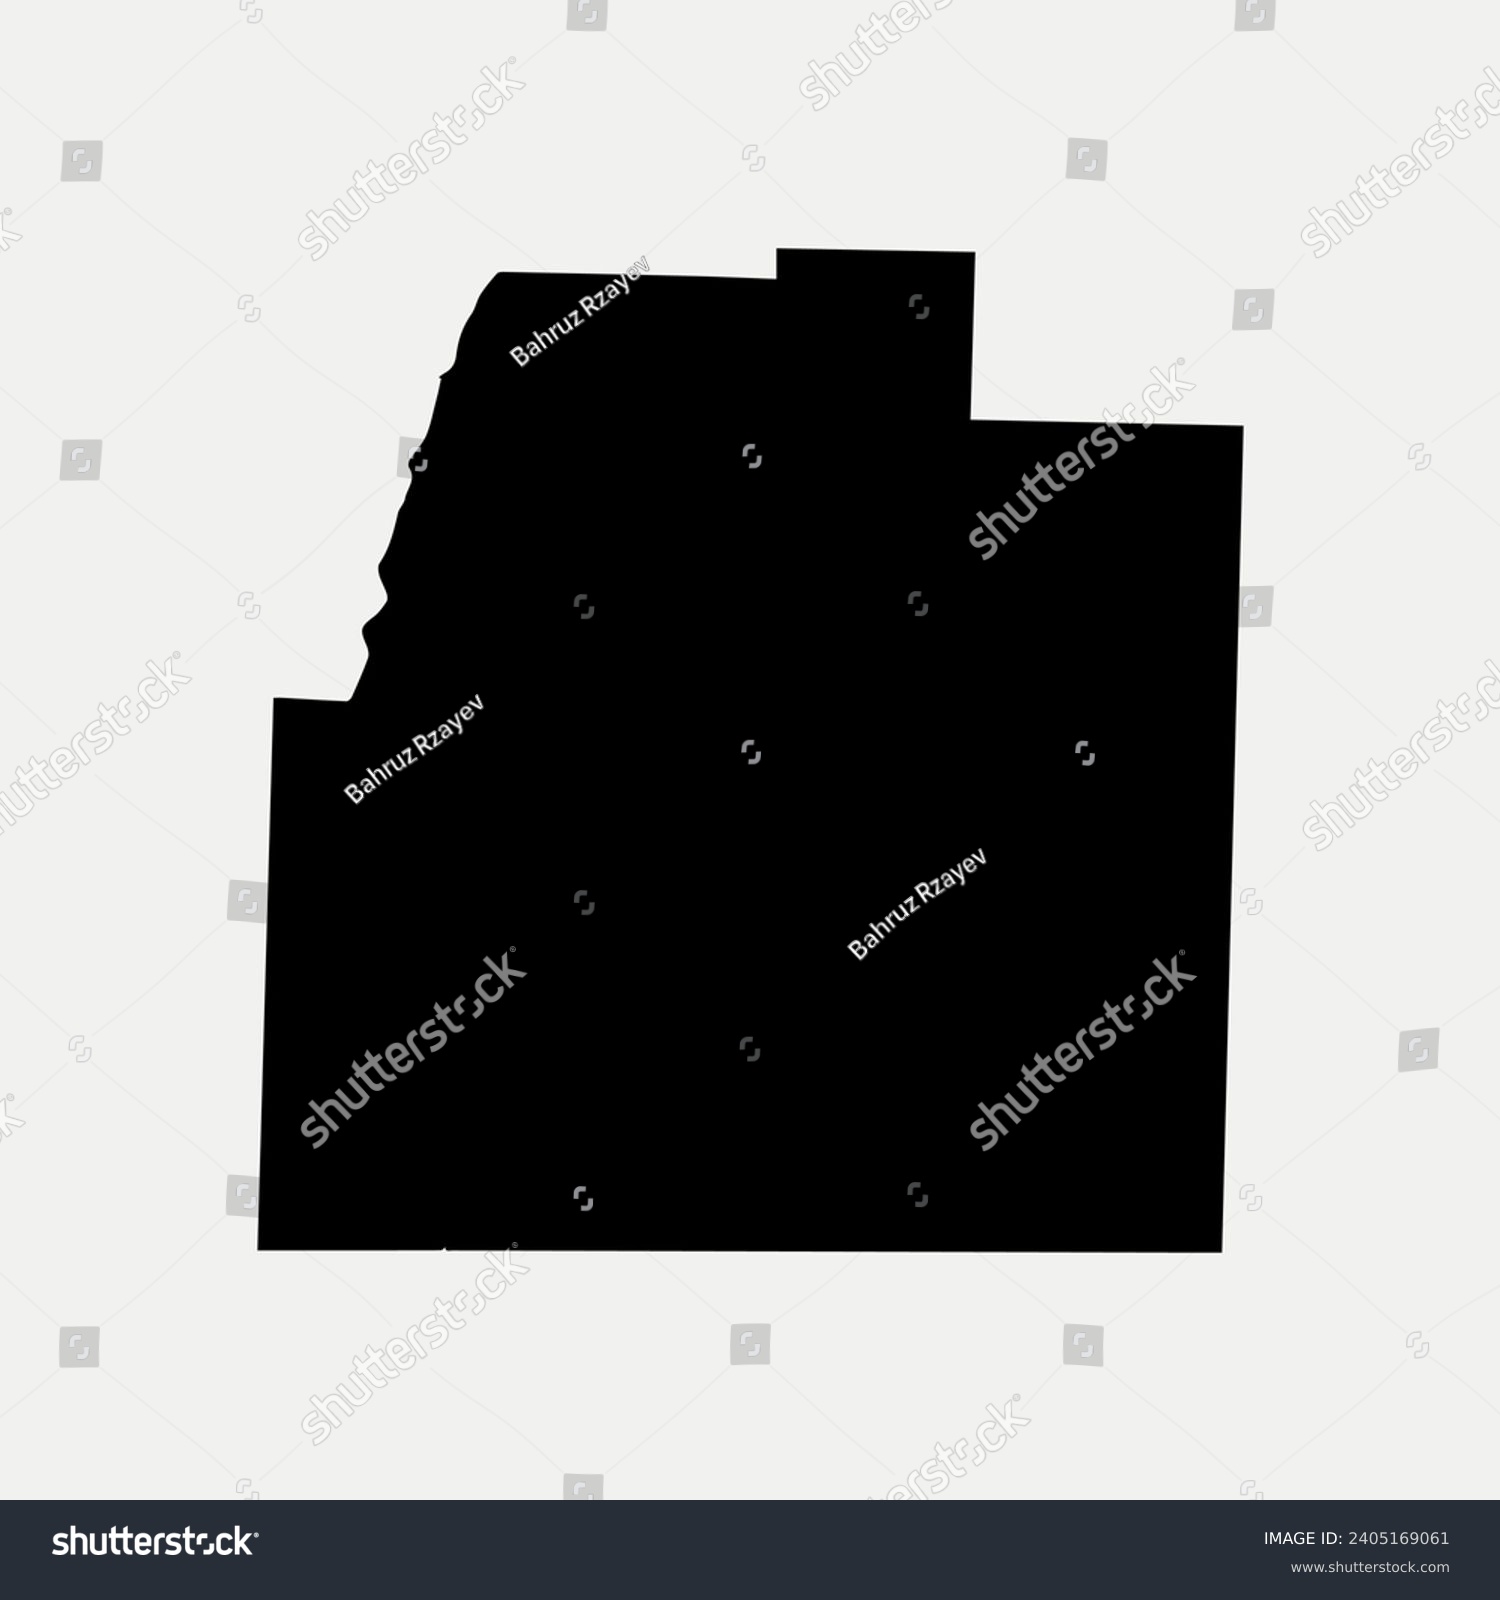 SVG of Map of Columbia County - Arkansas - United States outline silhouette graphic element Illustration template design svg